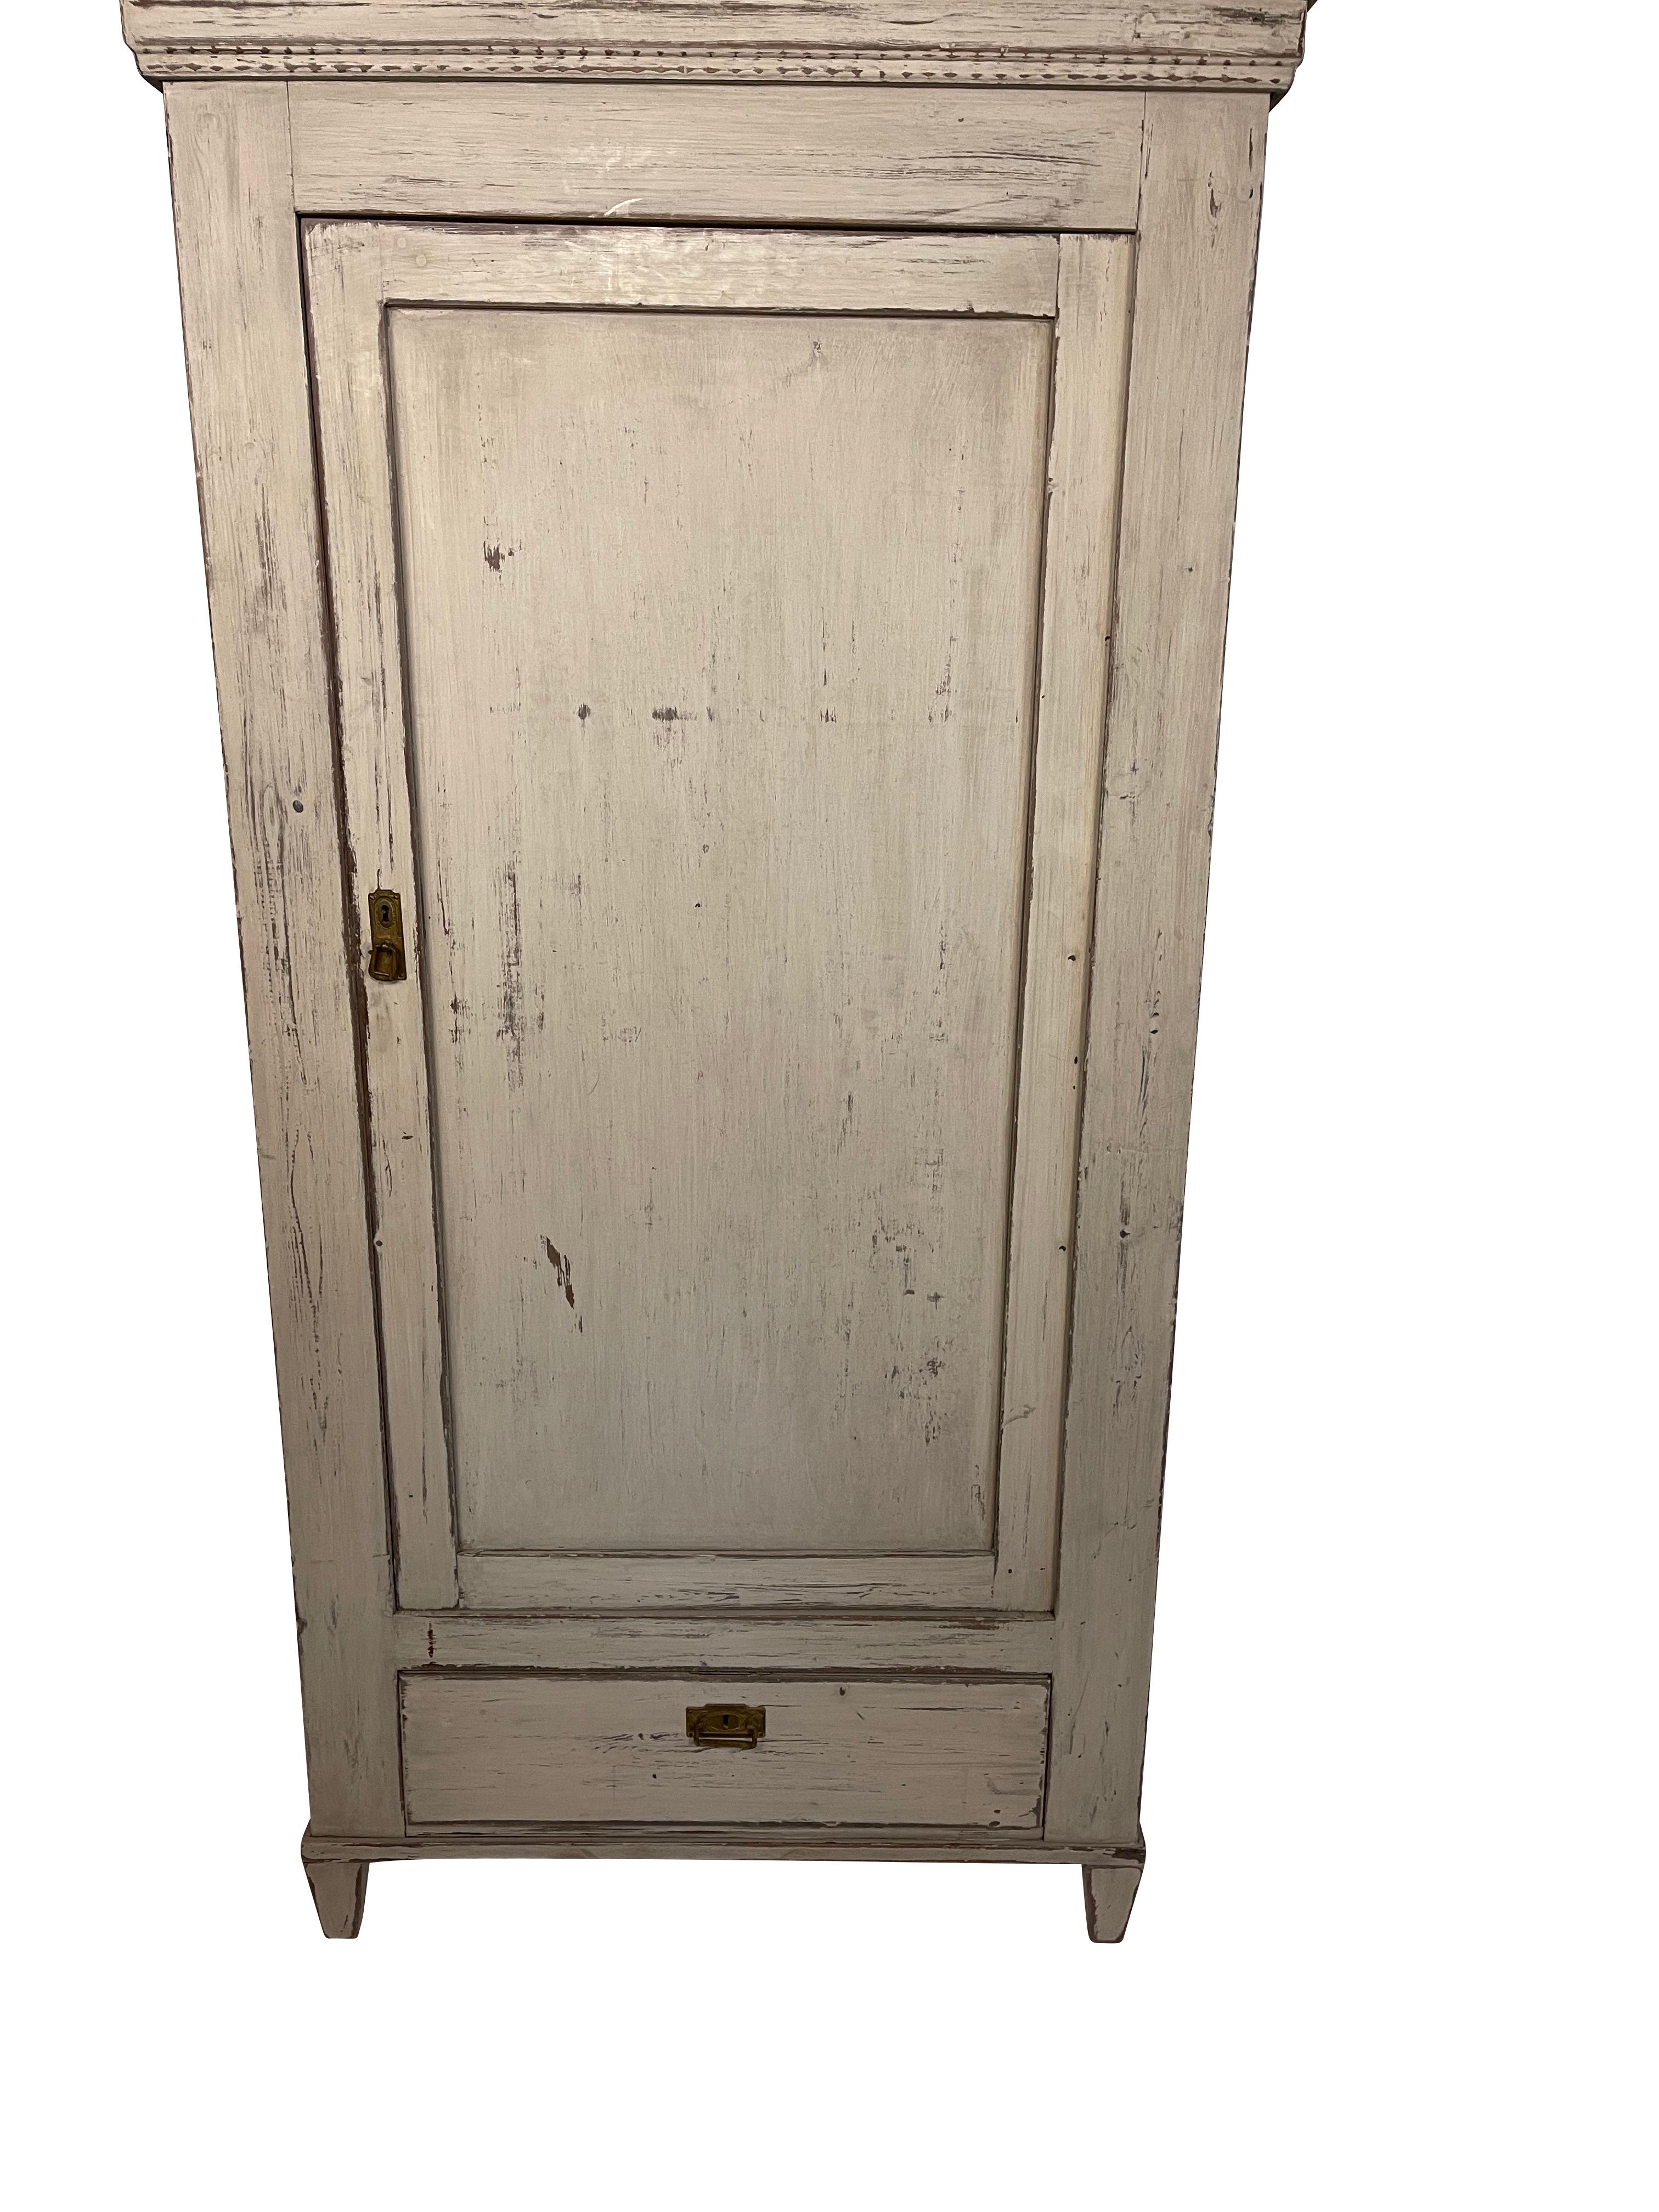 Gustavian grey painted armoire imported with one draw below and peaked cornice. Original lock and key. Possible for interior shelves.
Measures: 72.5